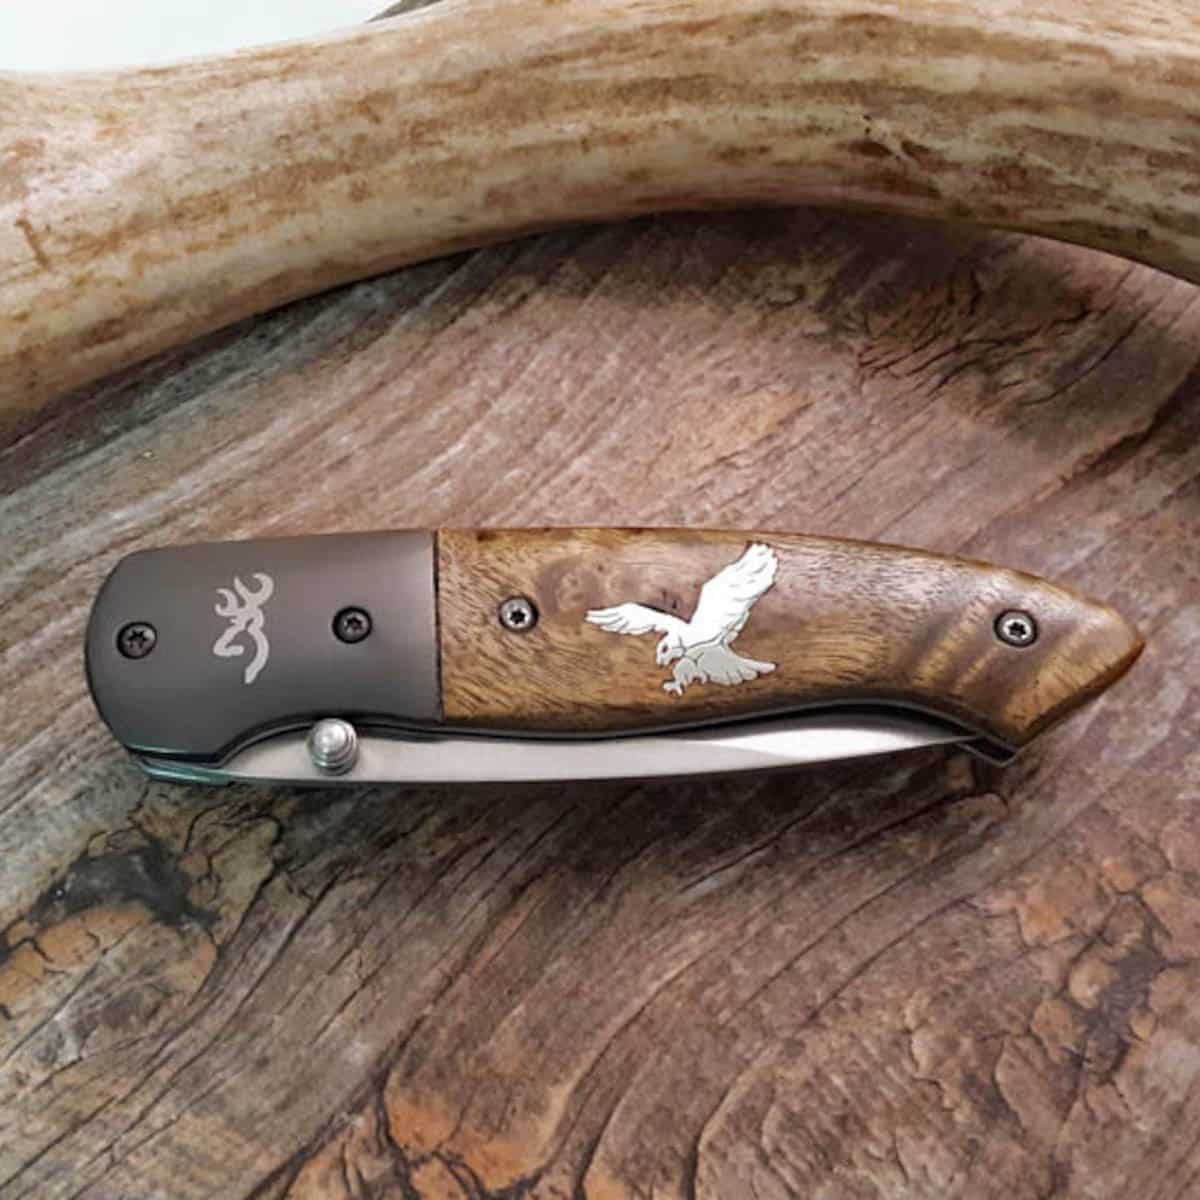 Silver Eagle Inlaid Browning knife